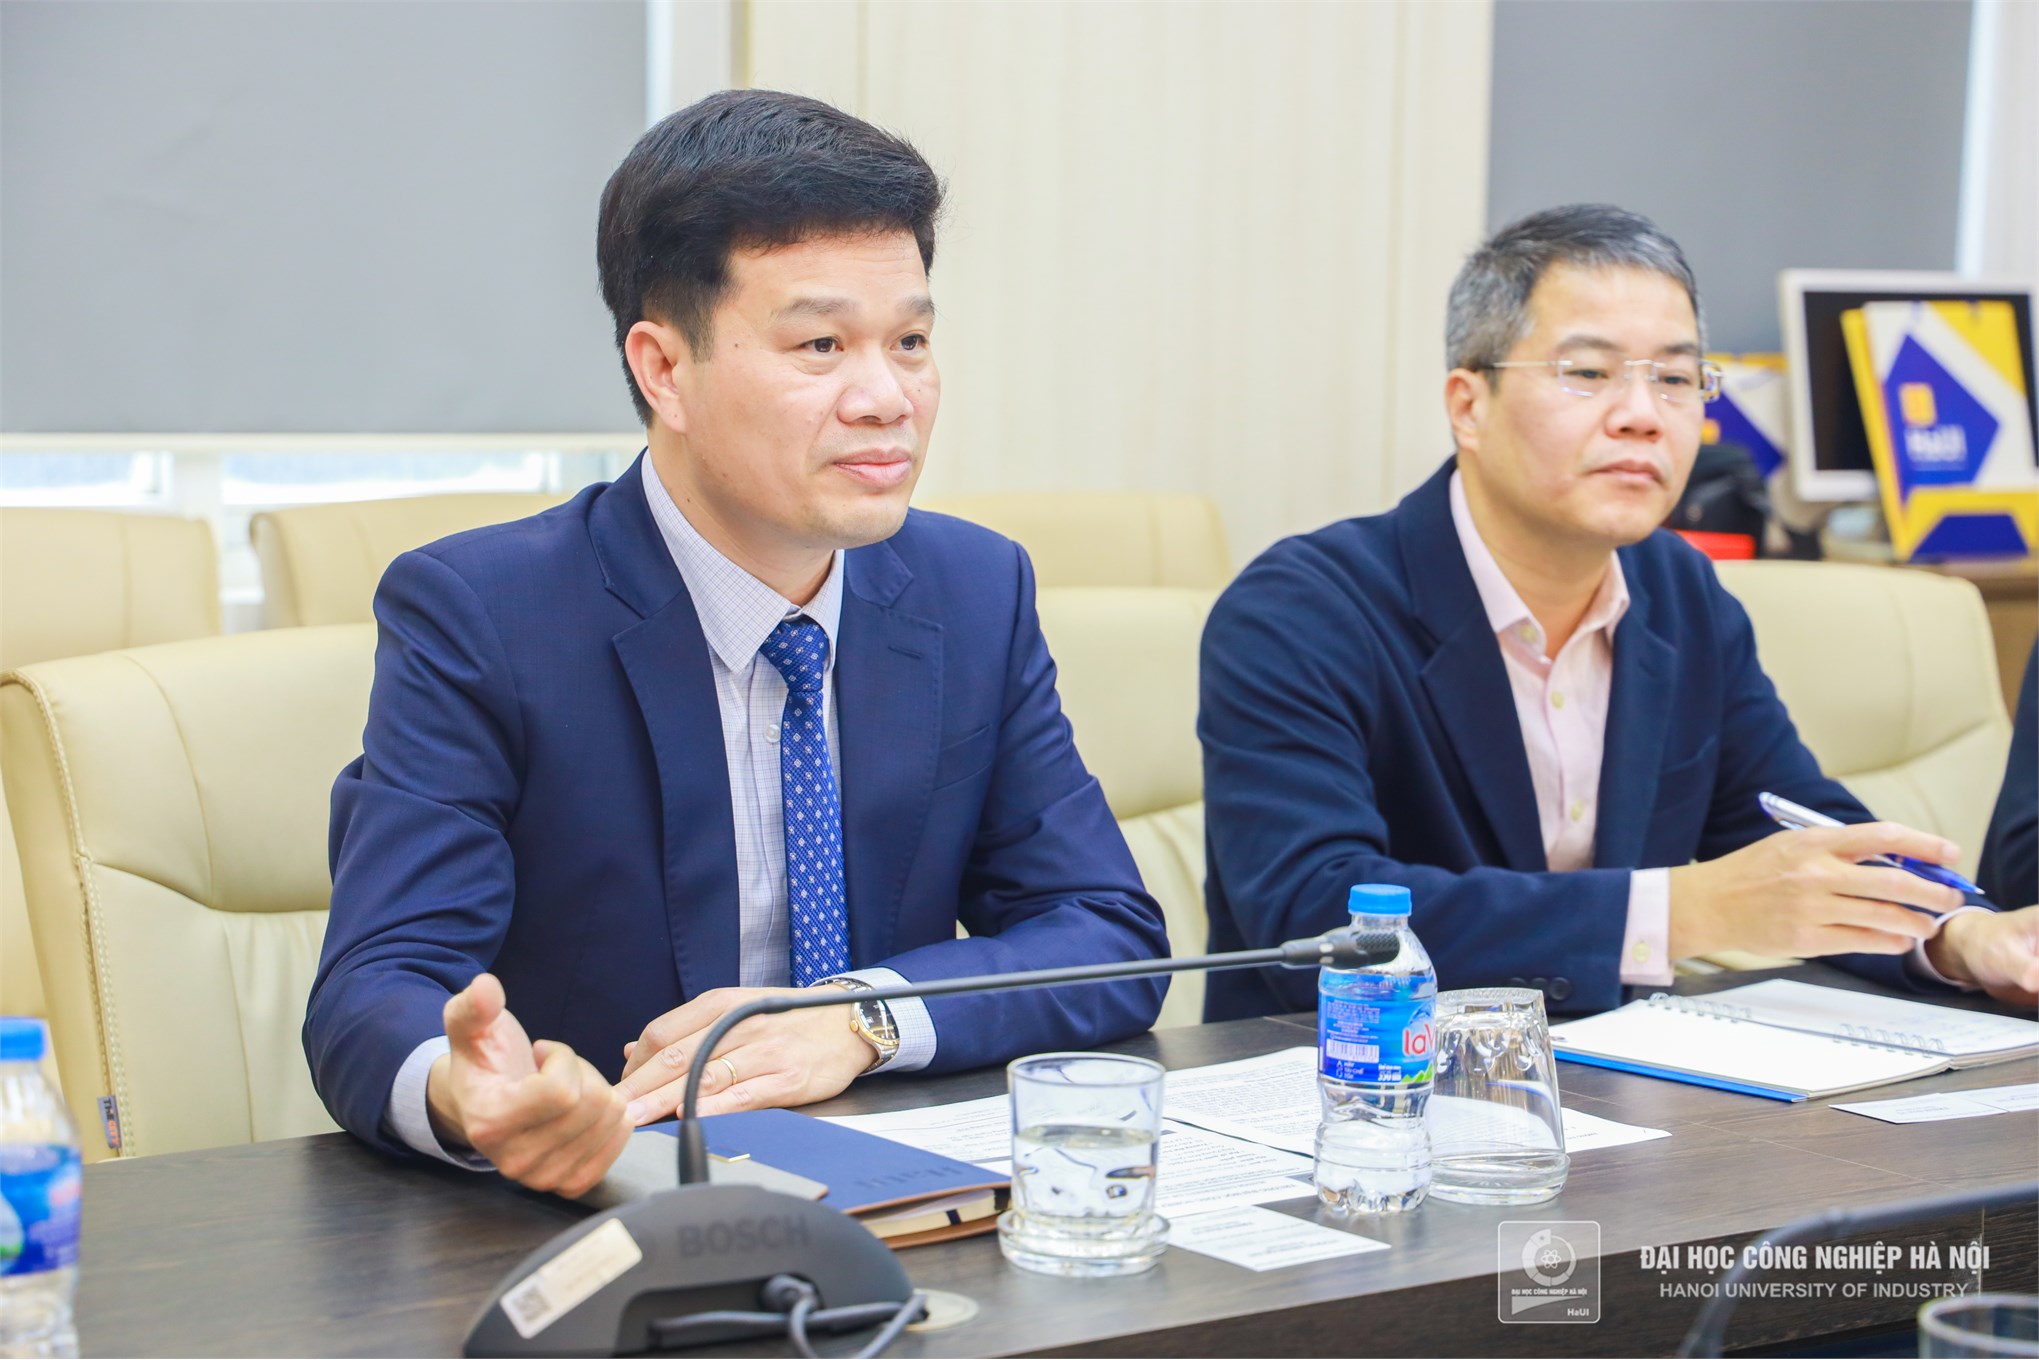 Education Counselor of the Chinese Embassy paid a working visit to Hanoi University of Industry